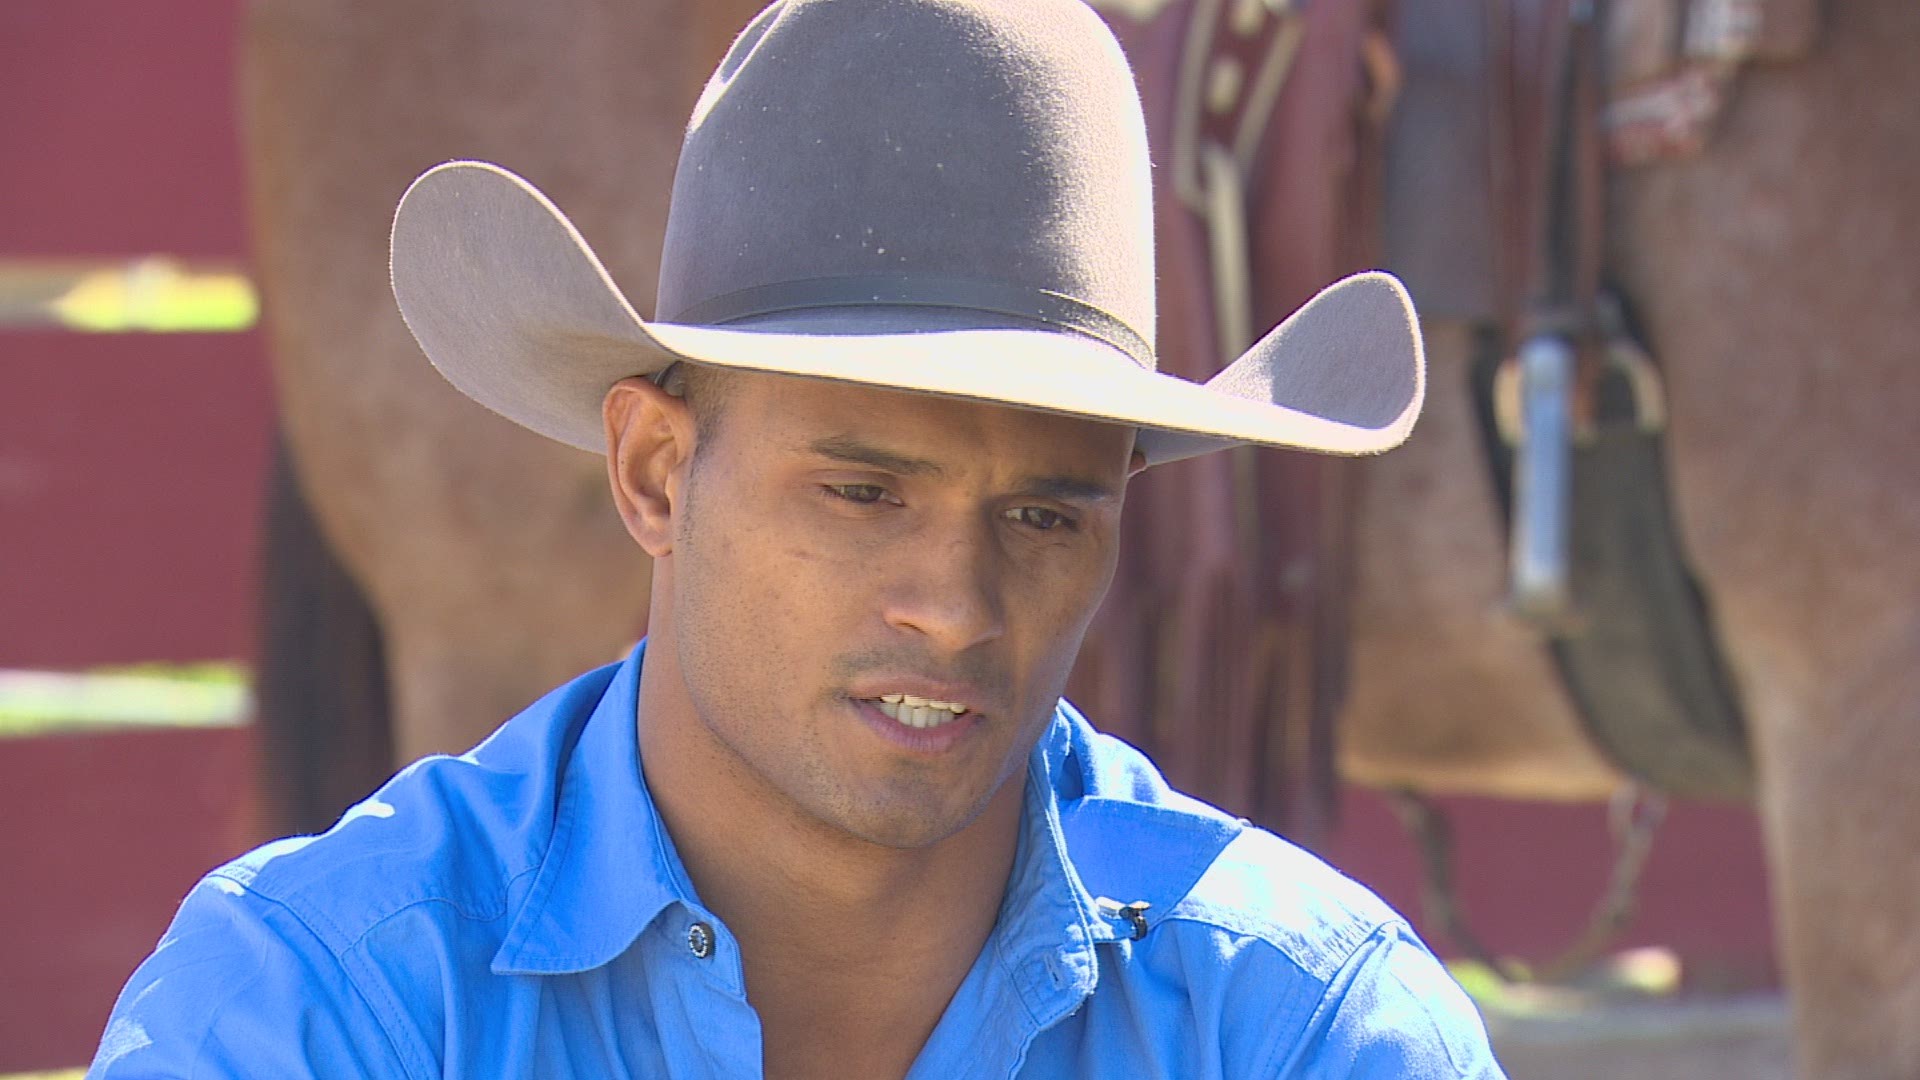 Anthony Thomas discusses the cost of being a rodeo cowboy and why he loves what he does.